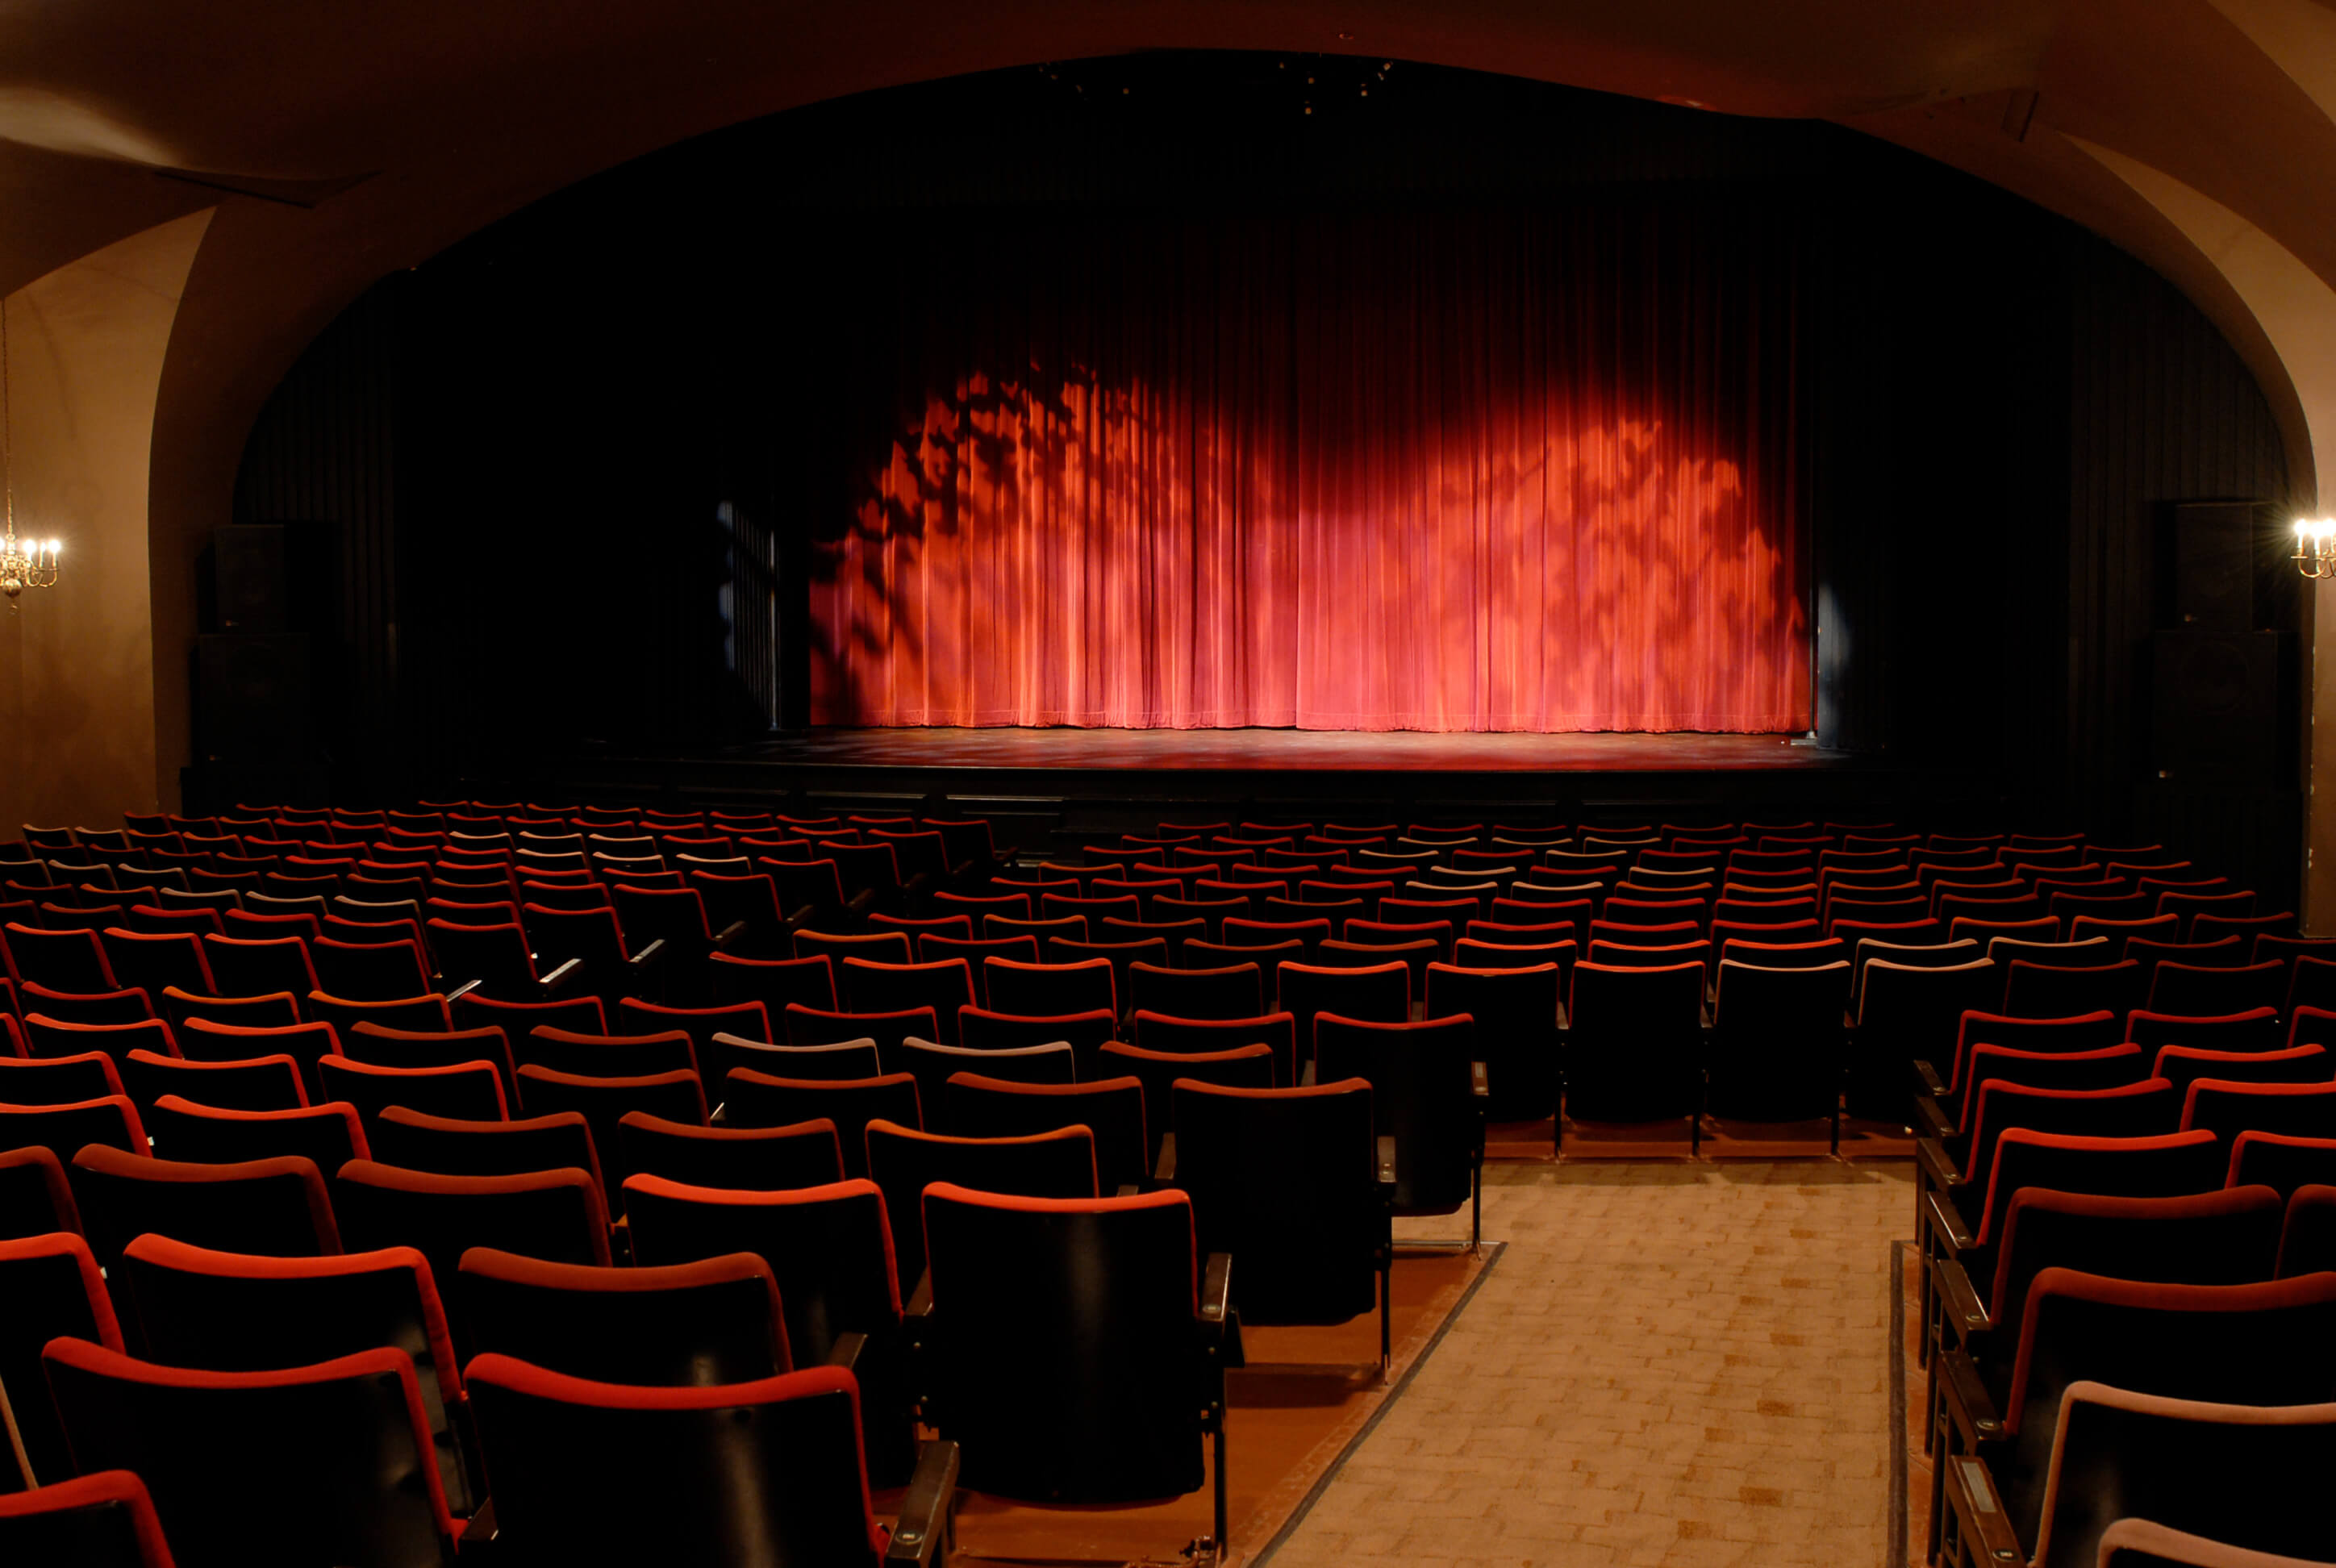 Spotlights on the stage, with seating in the auditorium